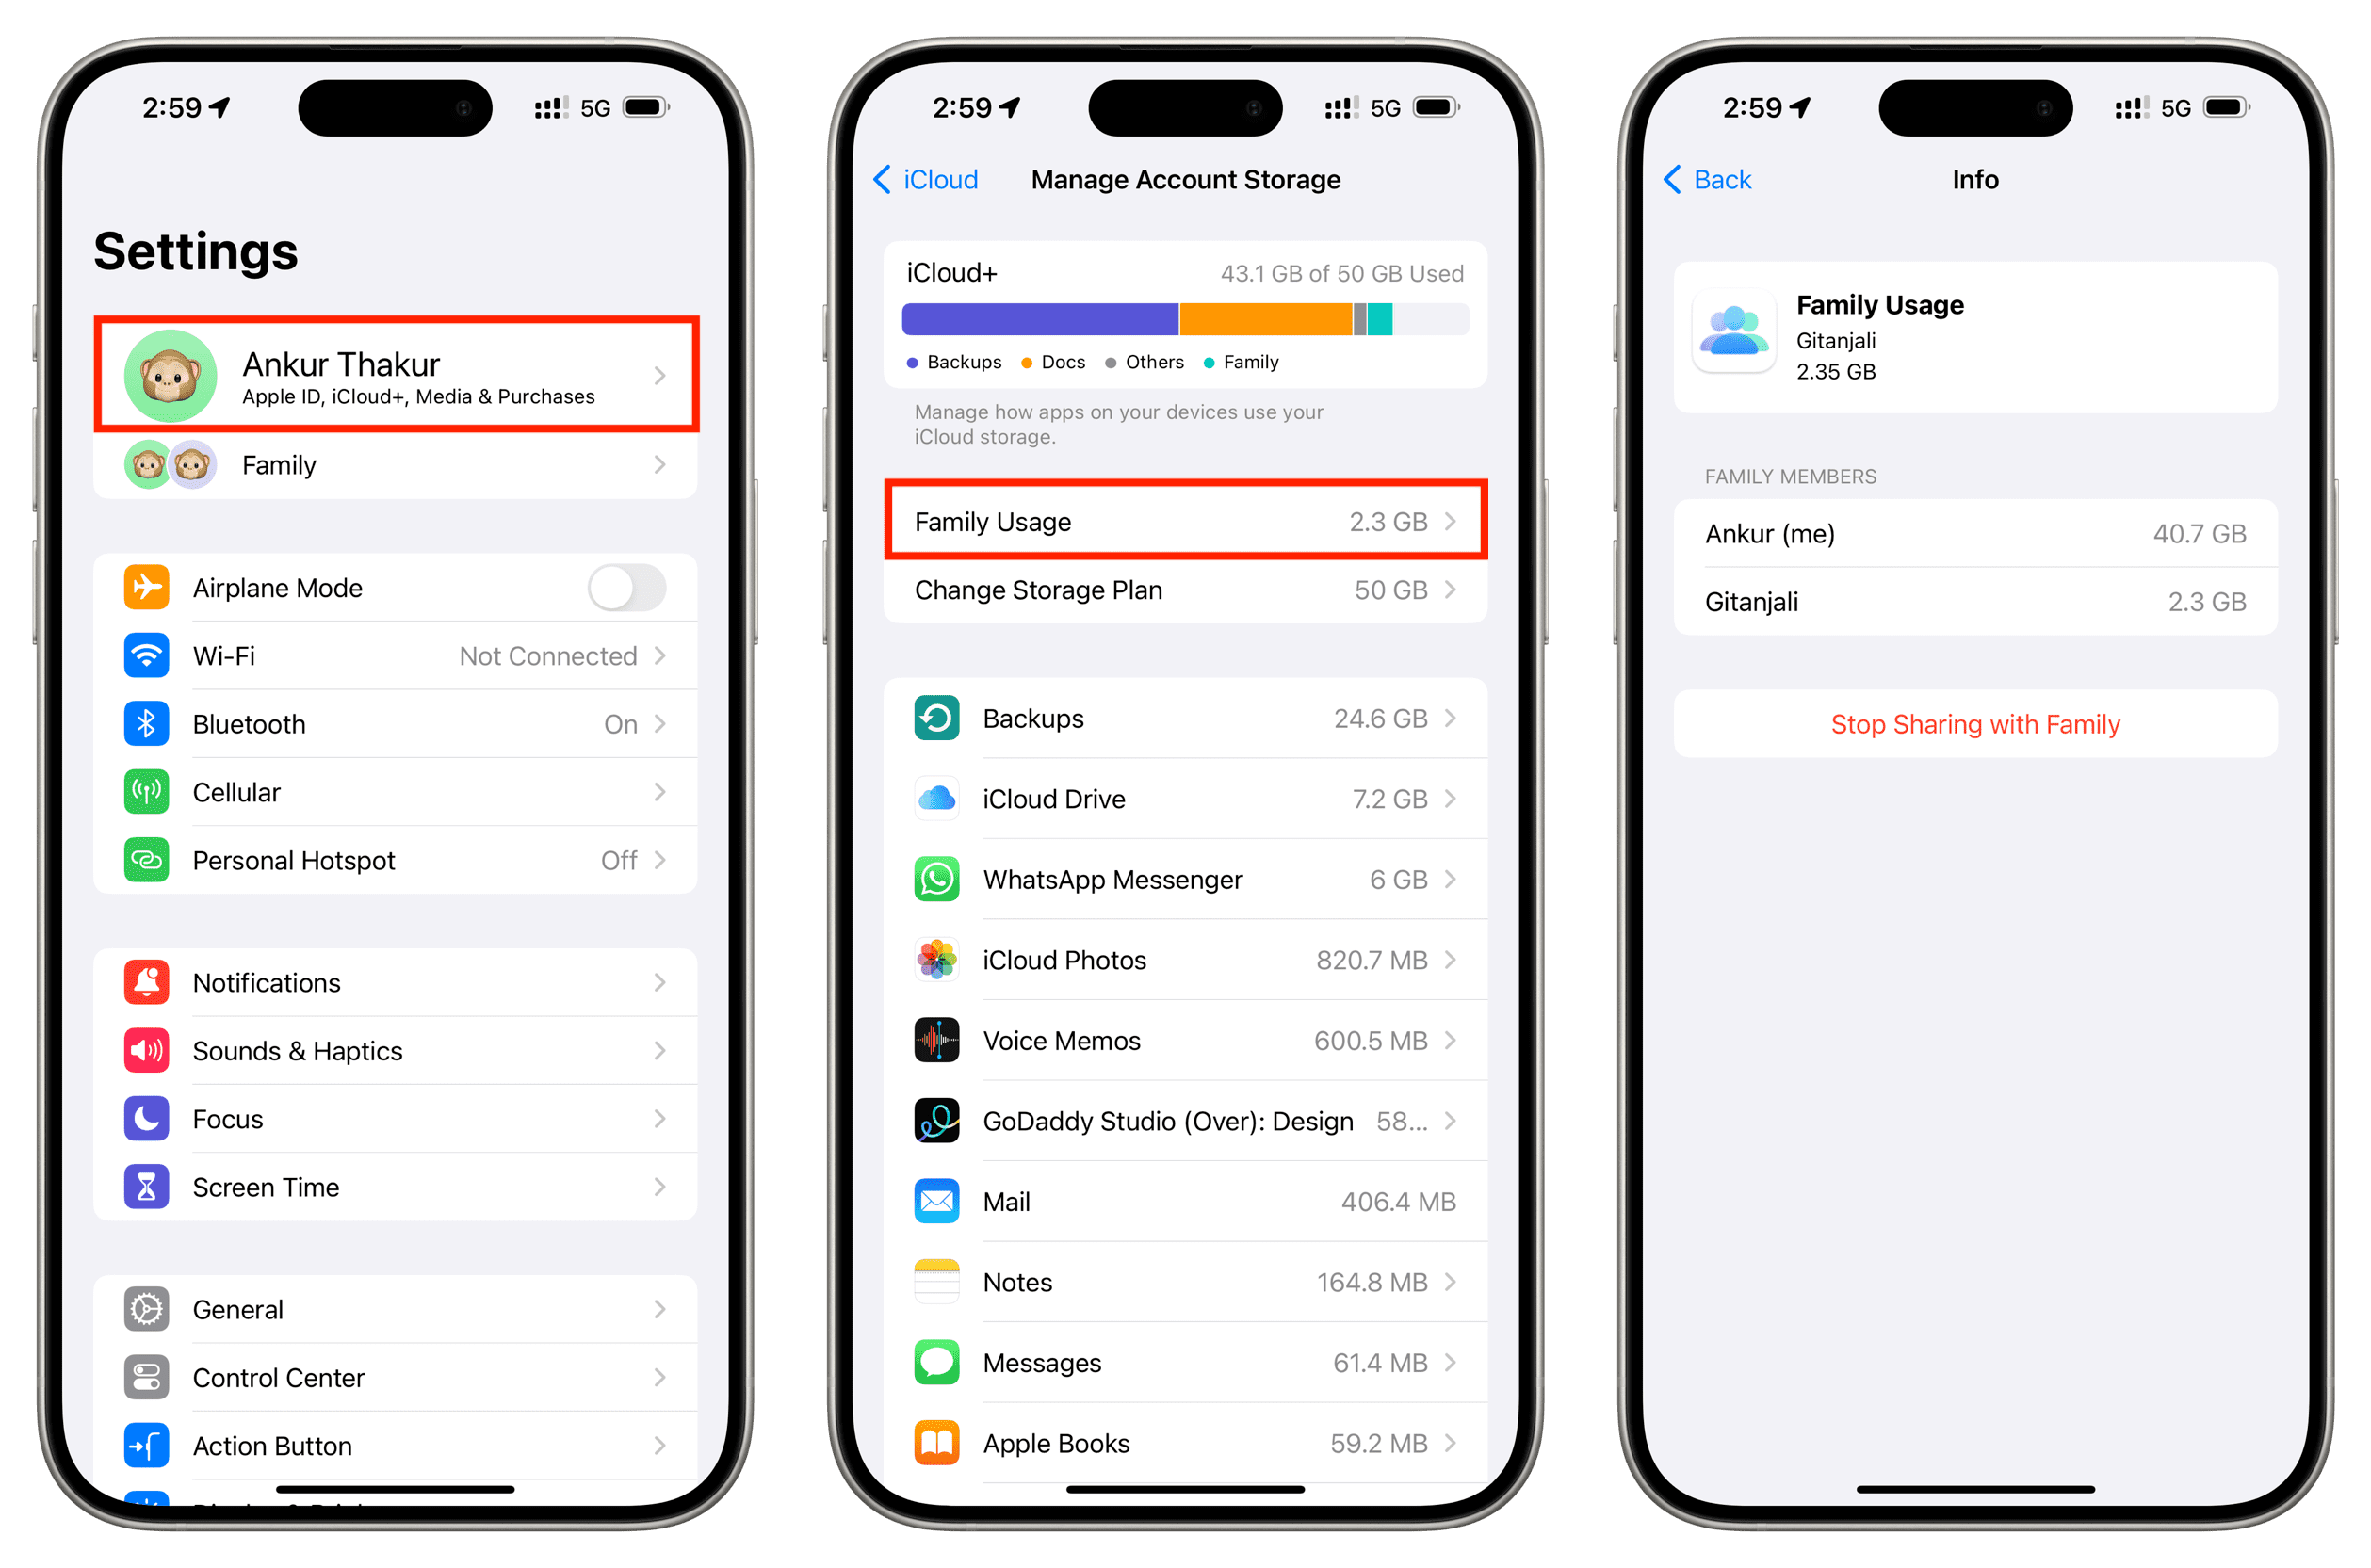 See Family Usage for shared iCloud storage in iPhone Settings